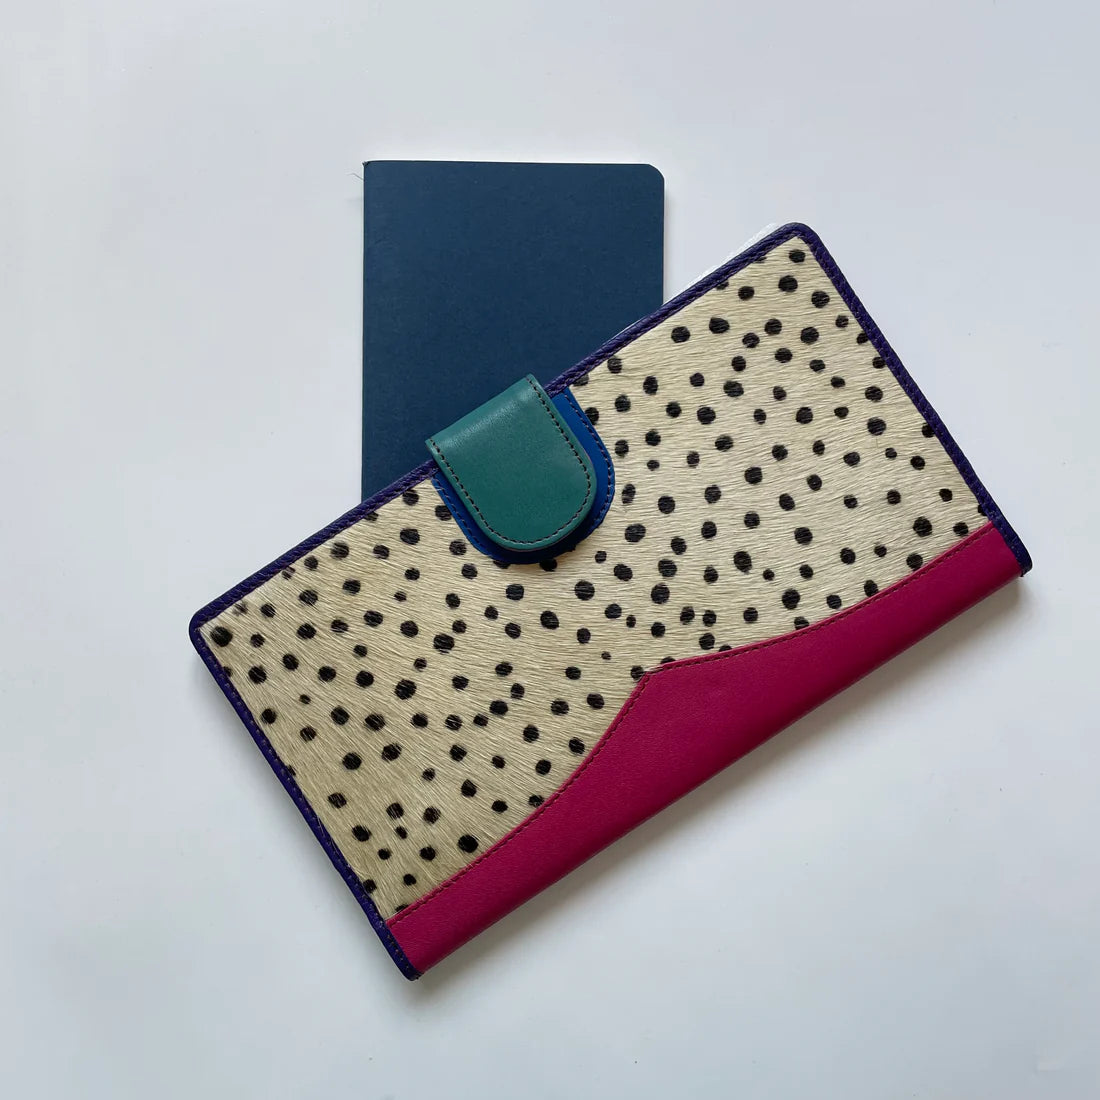 Eve organiser teal with pink spot